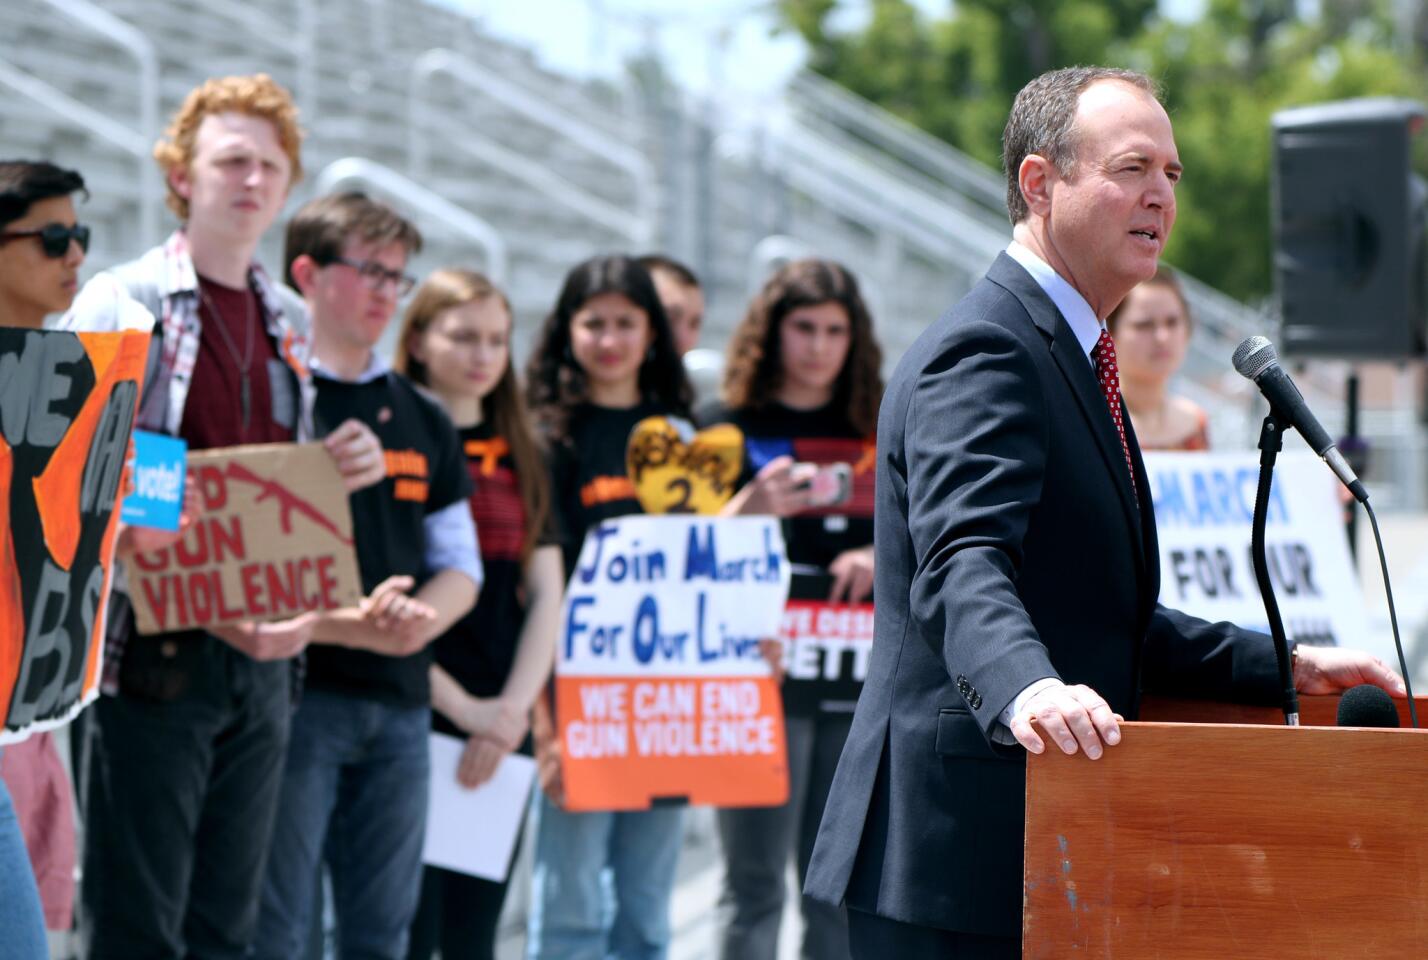 Congressman Adam Schiff speaks at rally against gun violence at Burroughs High School, in Burbank on Friday, April 19, 2019. The rally was held by the Burroughs Students Against Gun Violence Club.